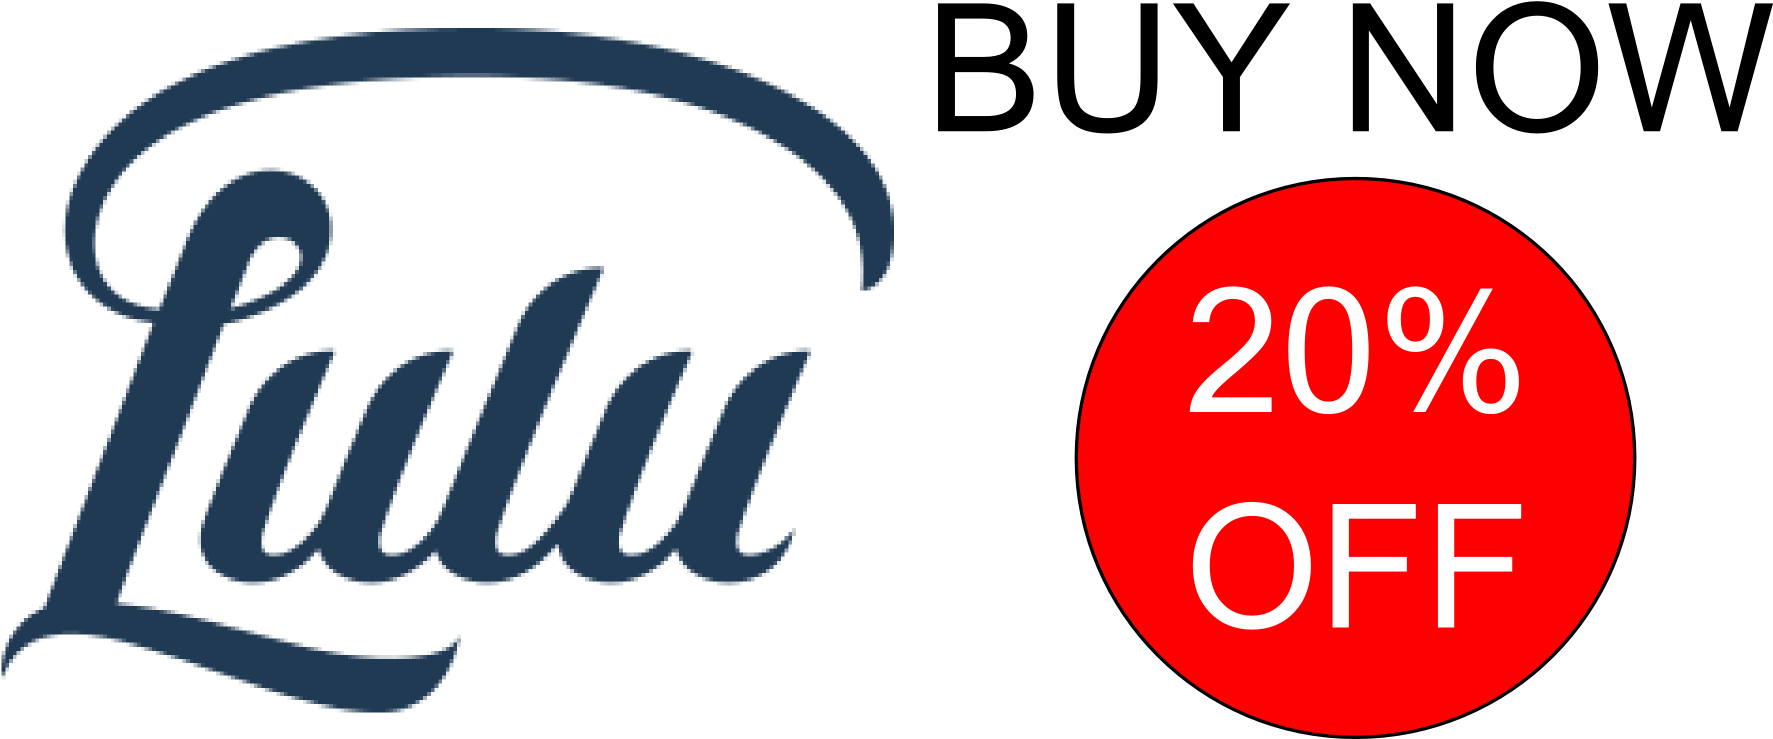 Lulu20 Percent Discount Buy Now PNG